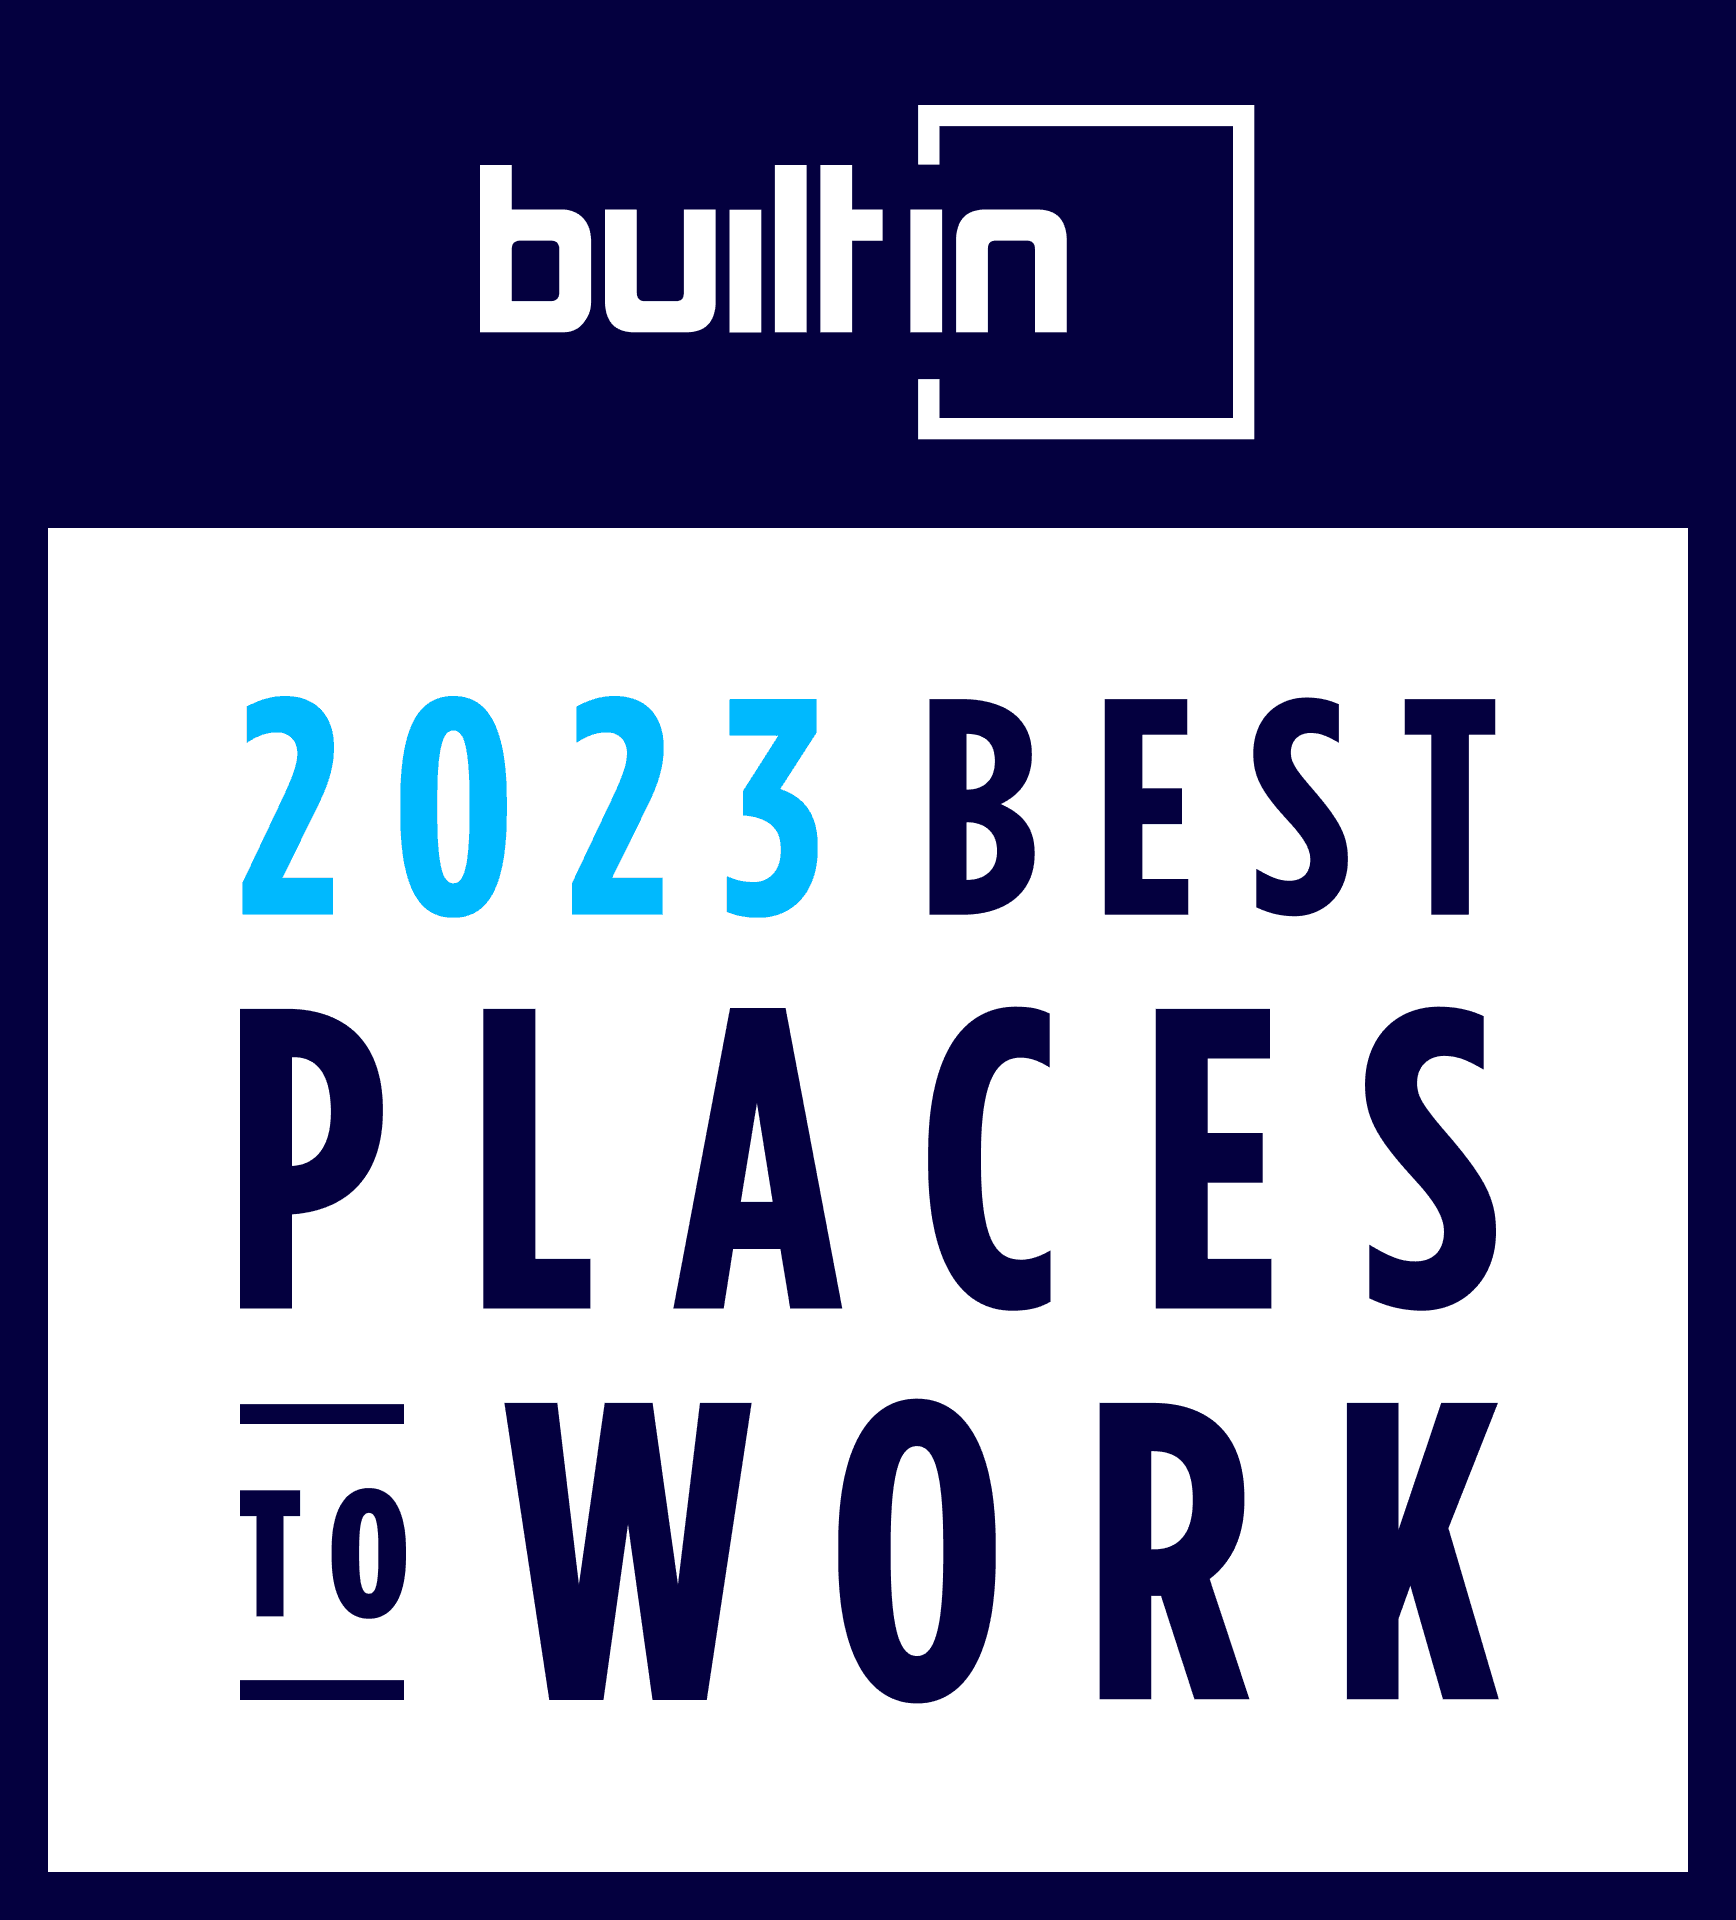 Built In's 2023 Best Places to Work